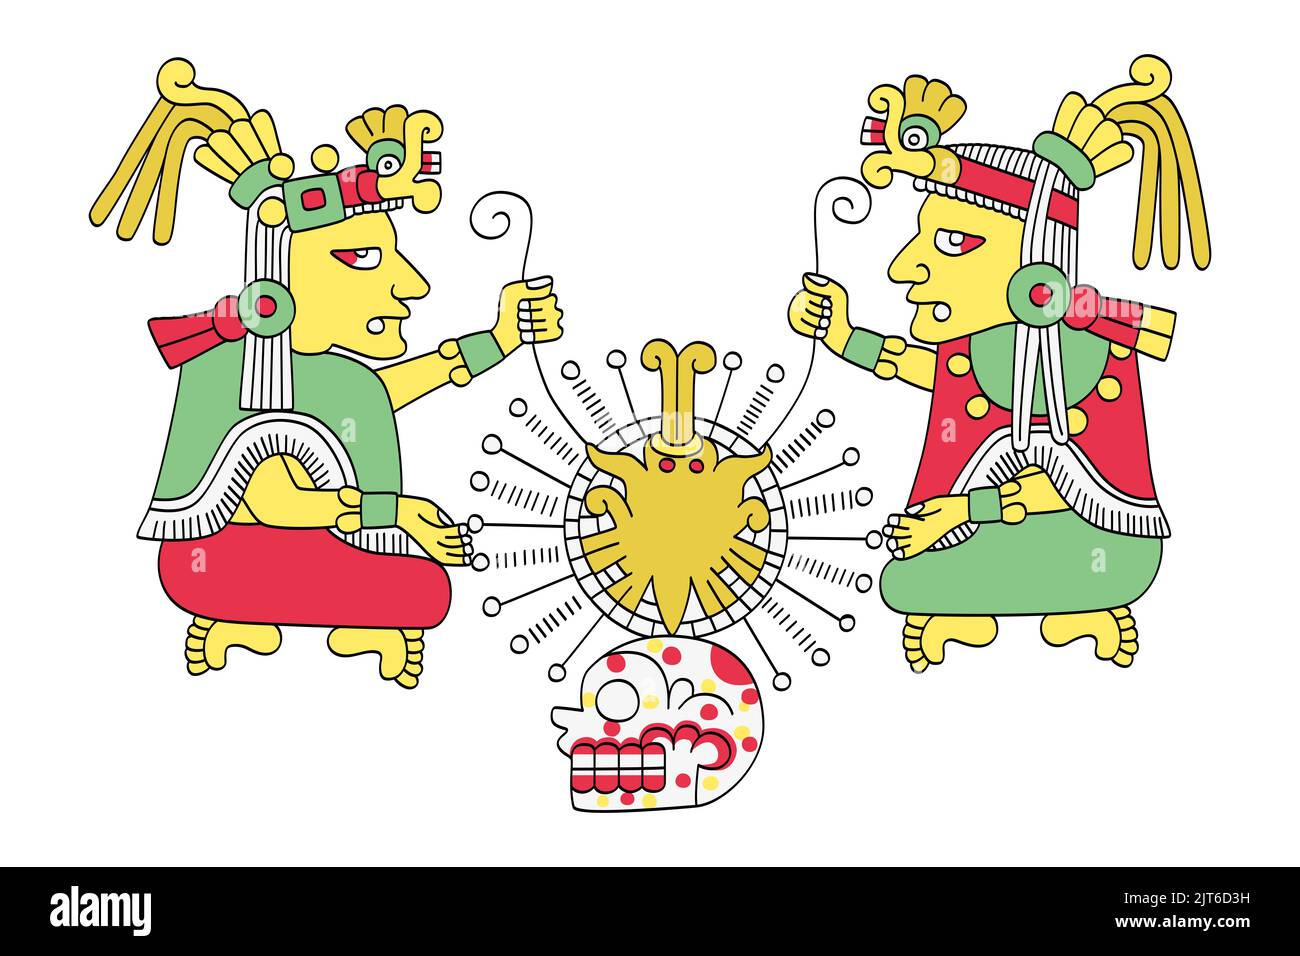 Ometeotl, dual gods in Aztec mythology. Ometecuhtli and Omecihuatl, or Tonacatecuhtli and Tonacacihuatl, a pair of deities, dwelling in Omeyocan. Stock Photo